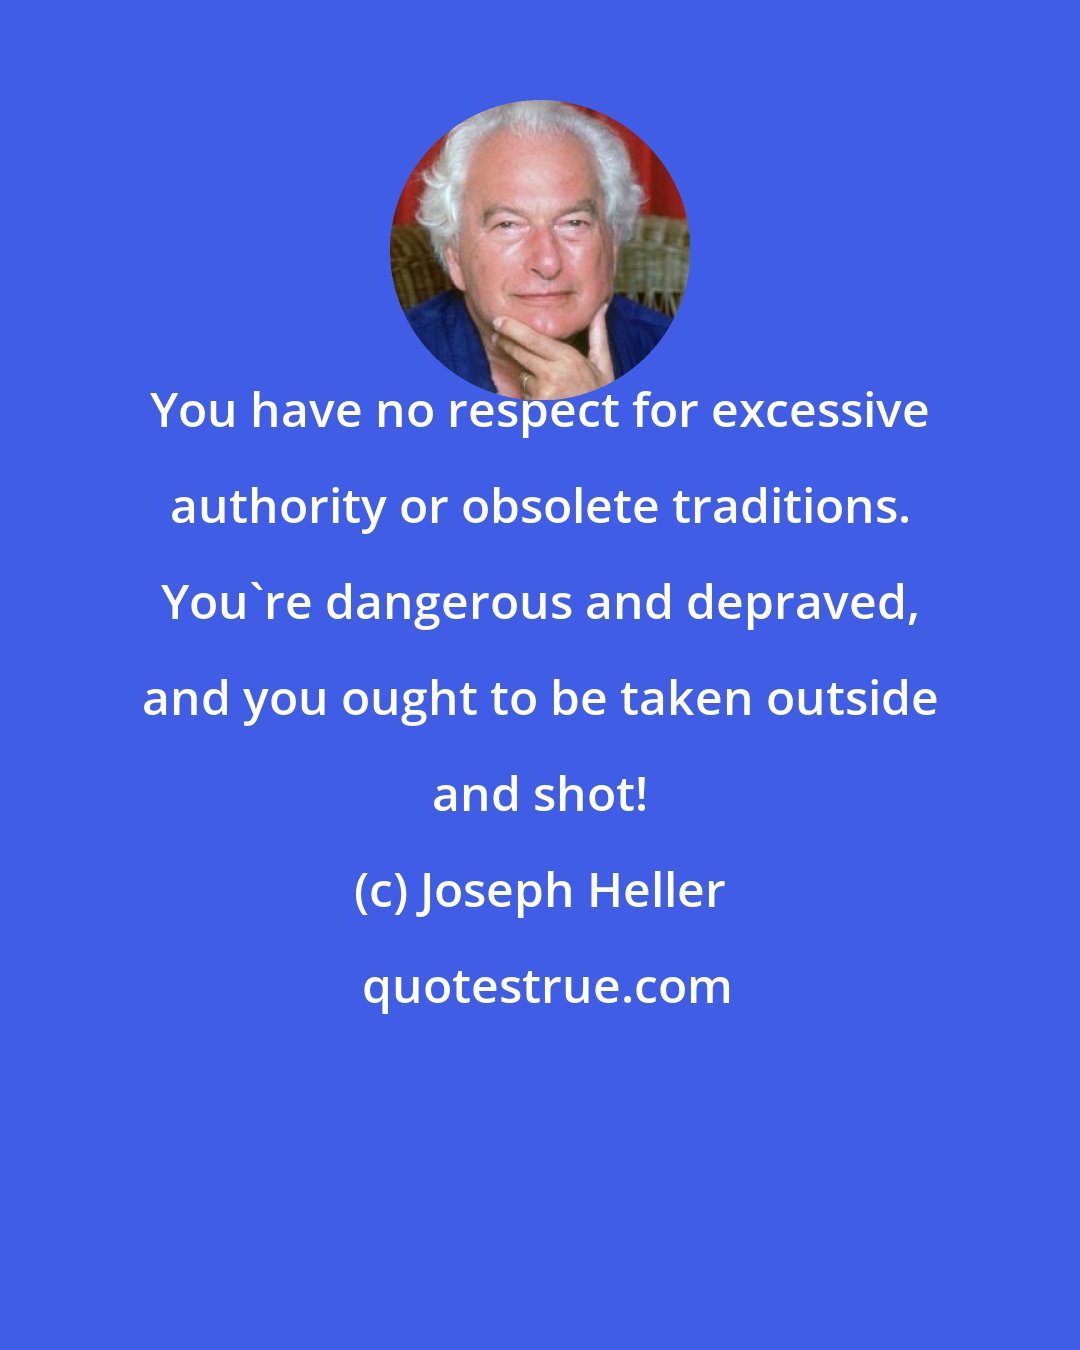 Joseph Heller: You have no respect for excessive authority or obsolete traditions. You're dangerous and depraved, and you ought to be taken outside and shot!